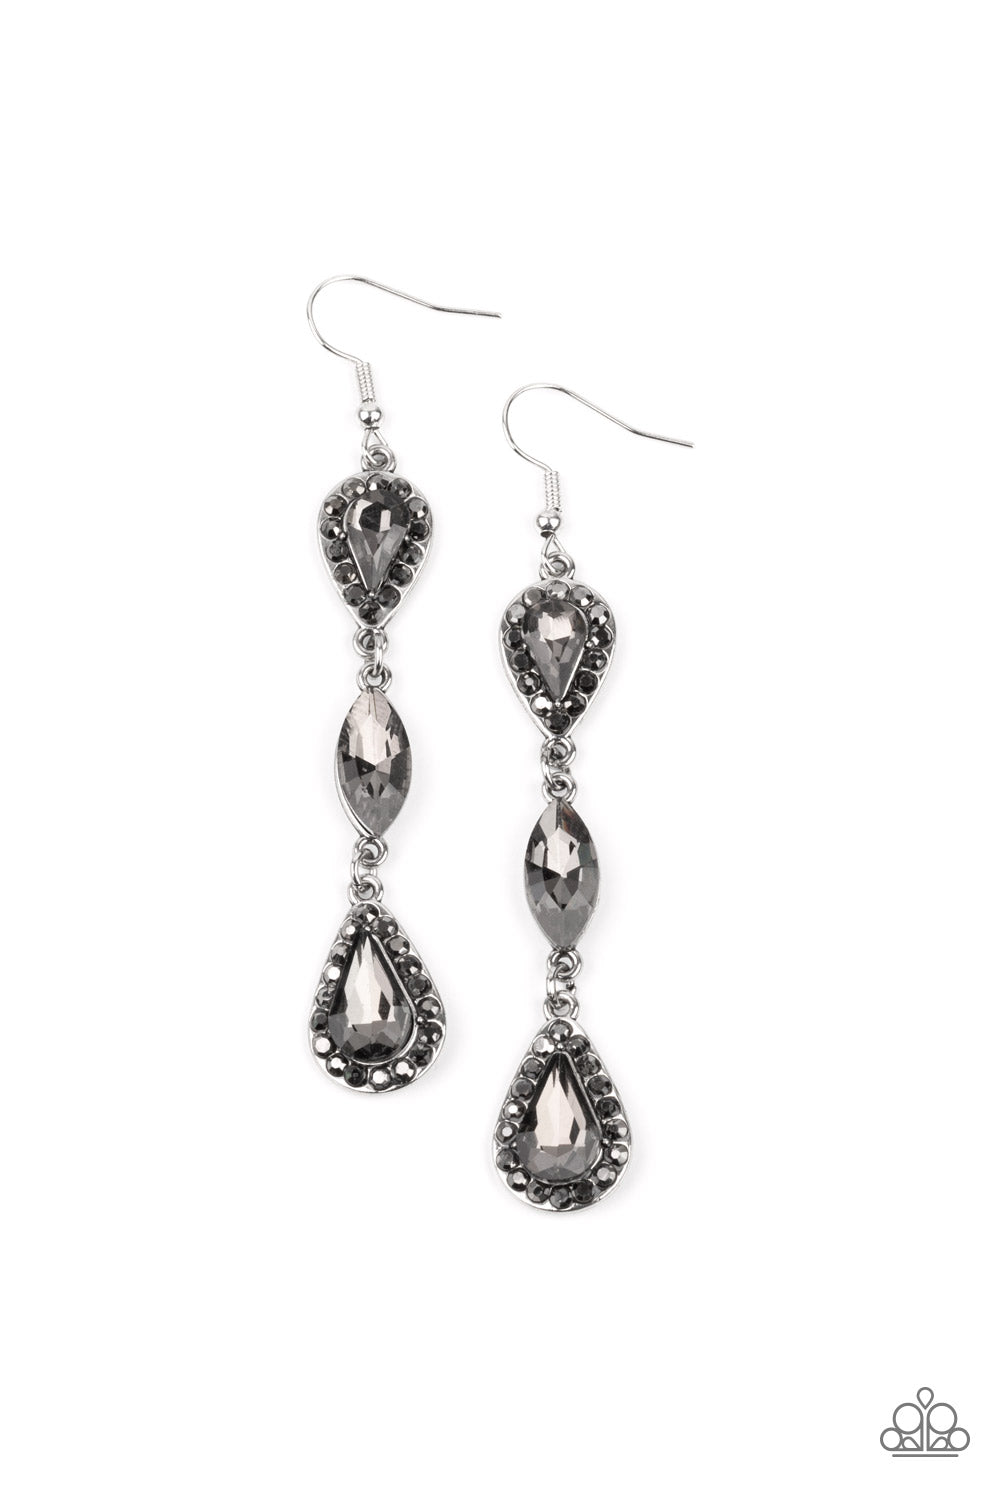 Paparazzi Test of TIMELESS - Silver Earrings - A Finishing Touch Jewelry